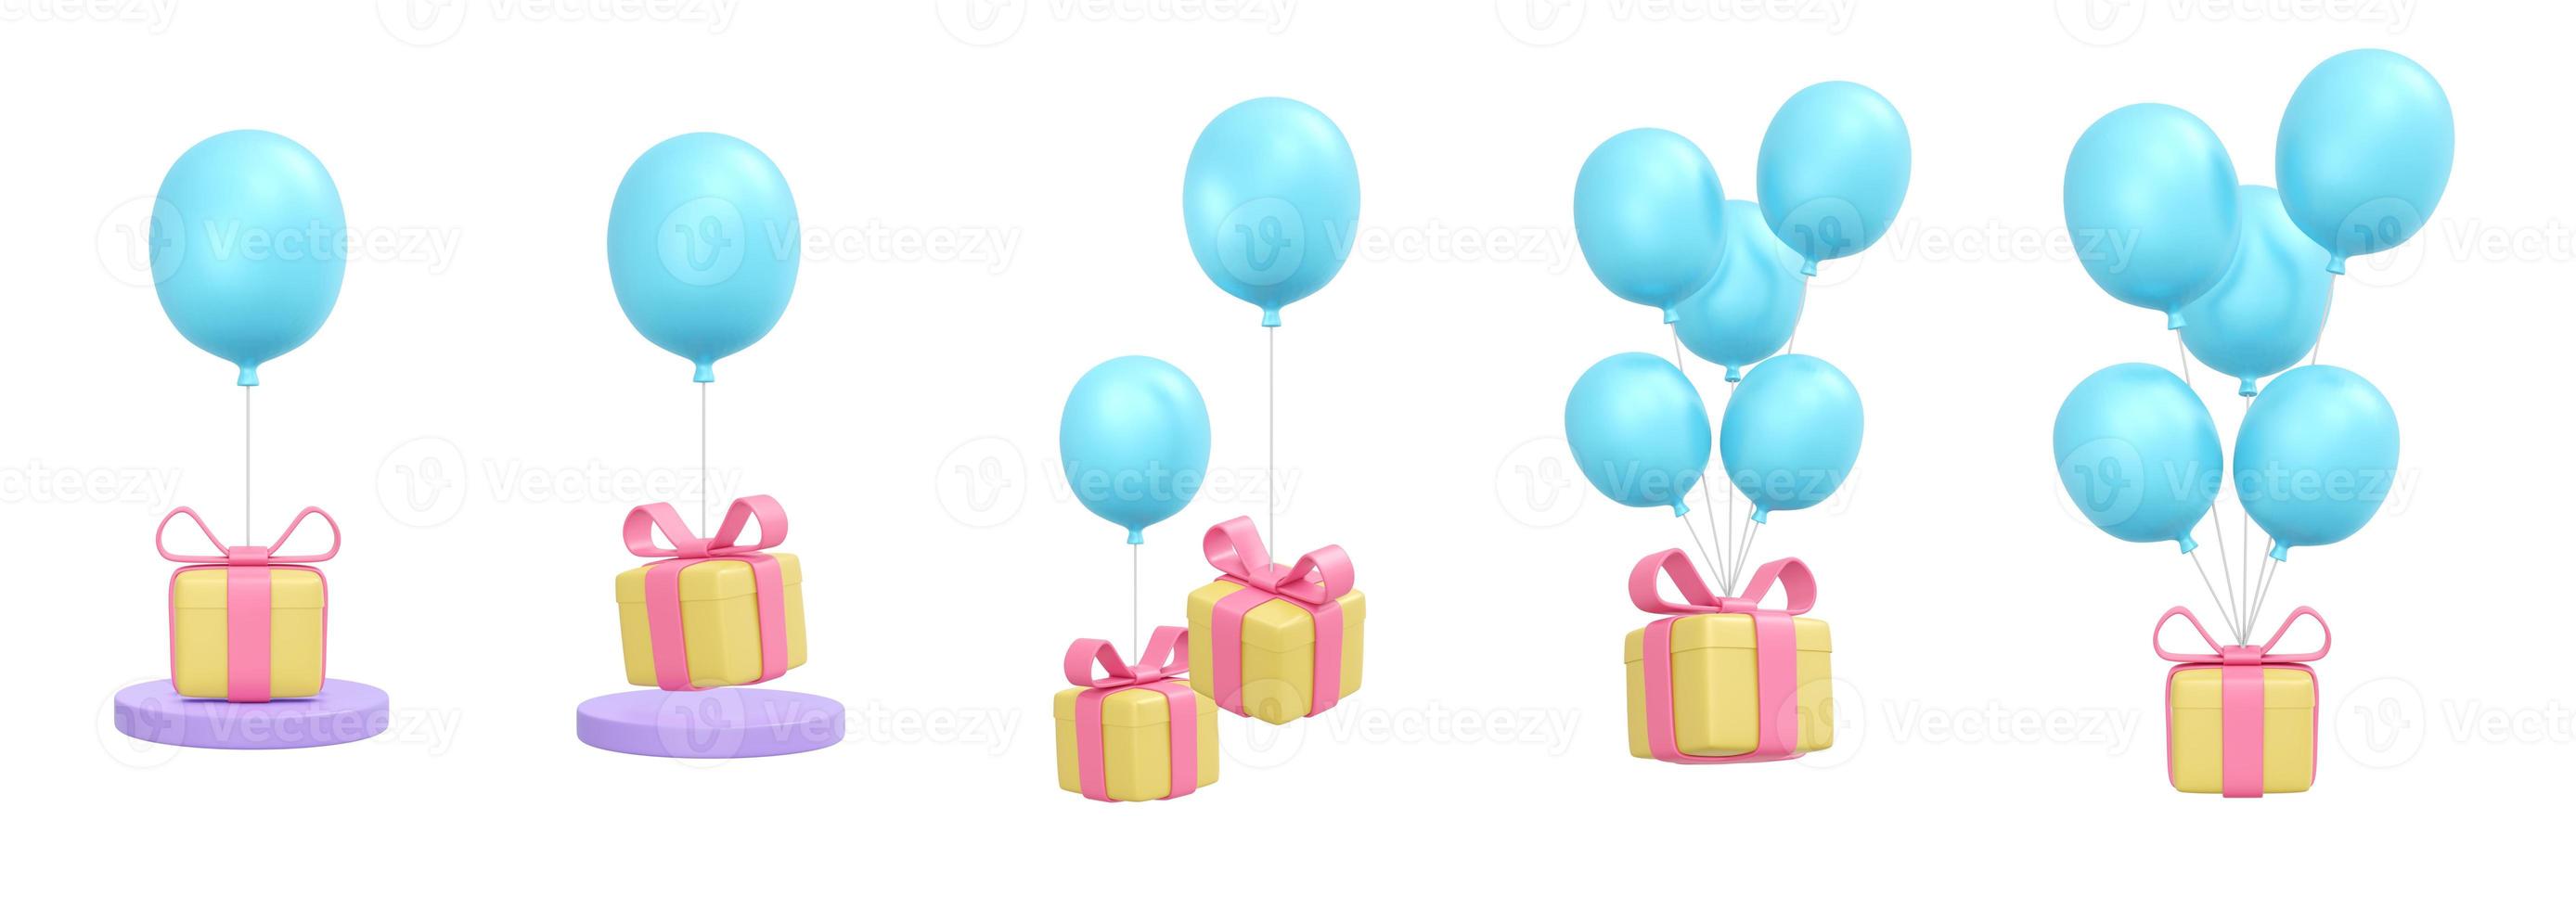 3D Rendering of set of gift box with balloon concept of present decoration icon collection for commercial design isolated on white background. 3D Render illustration cartoon style. photo